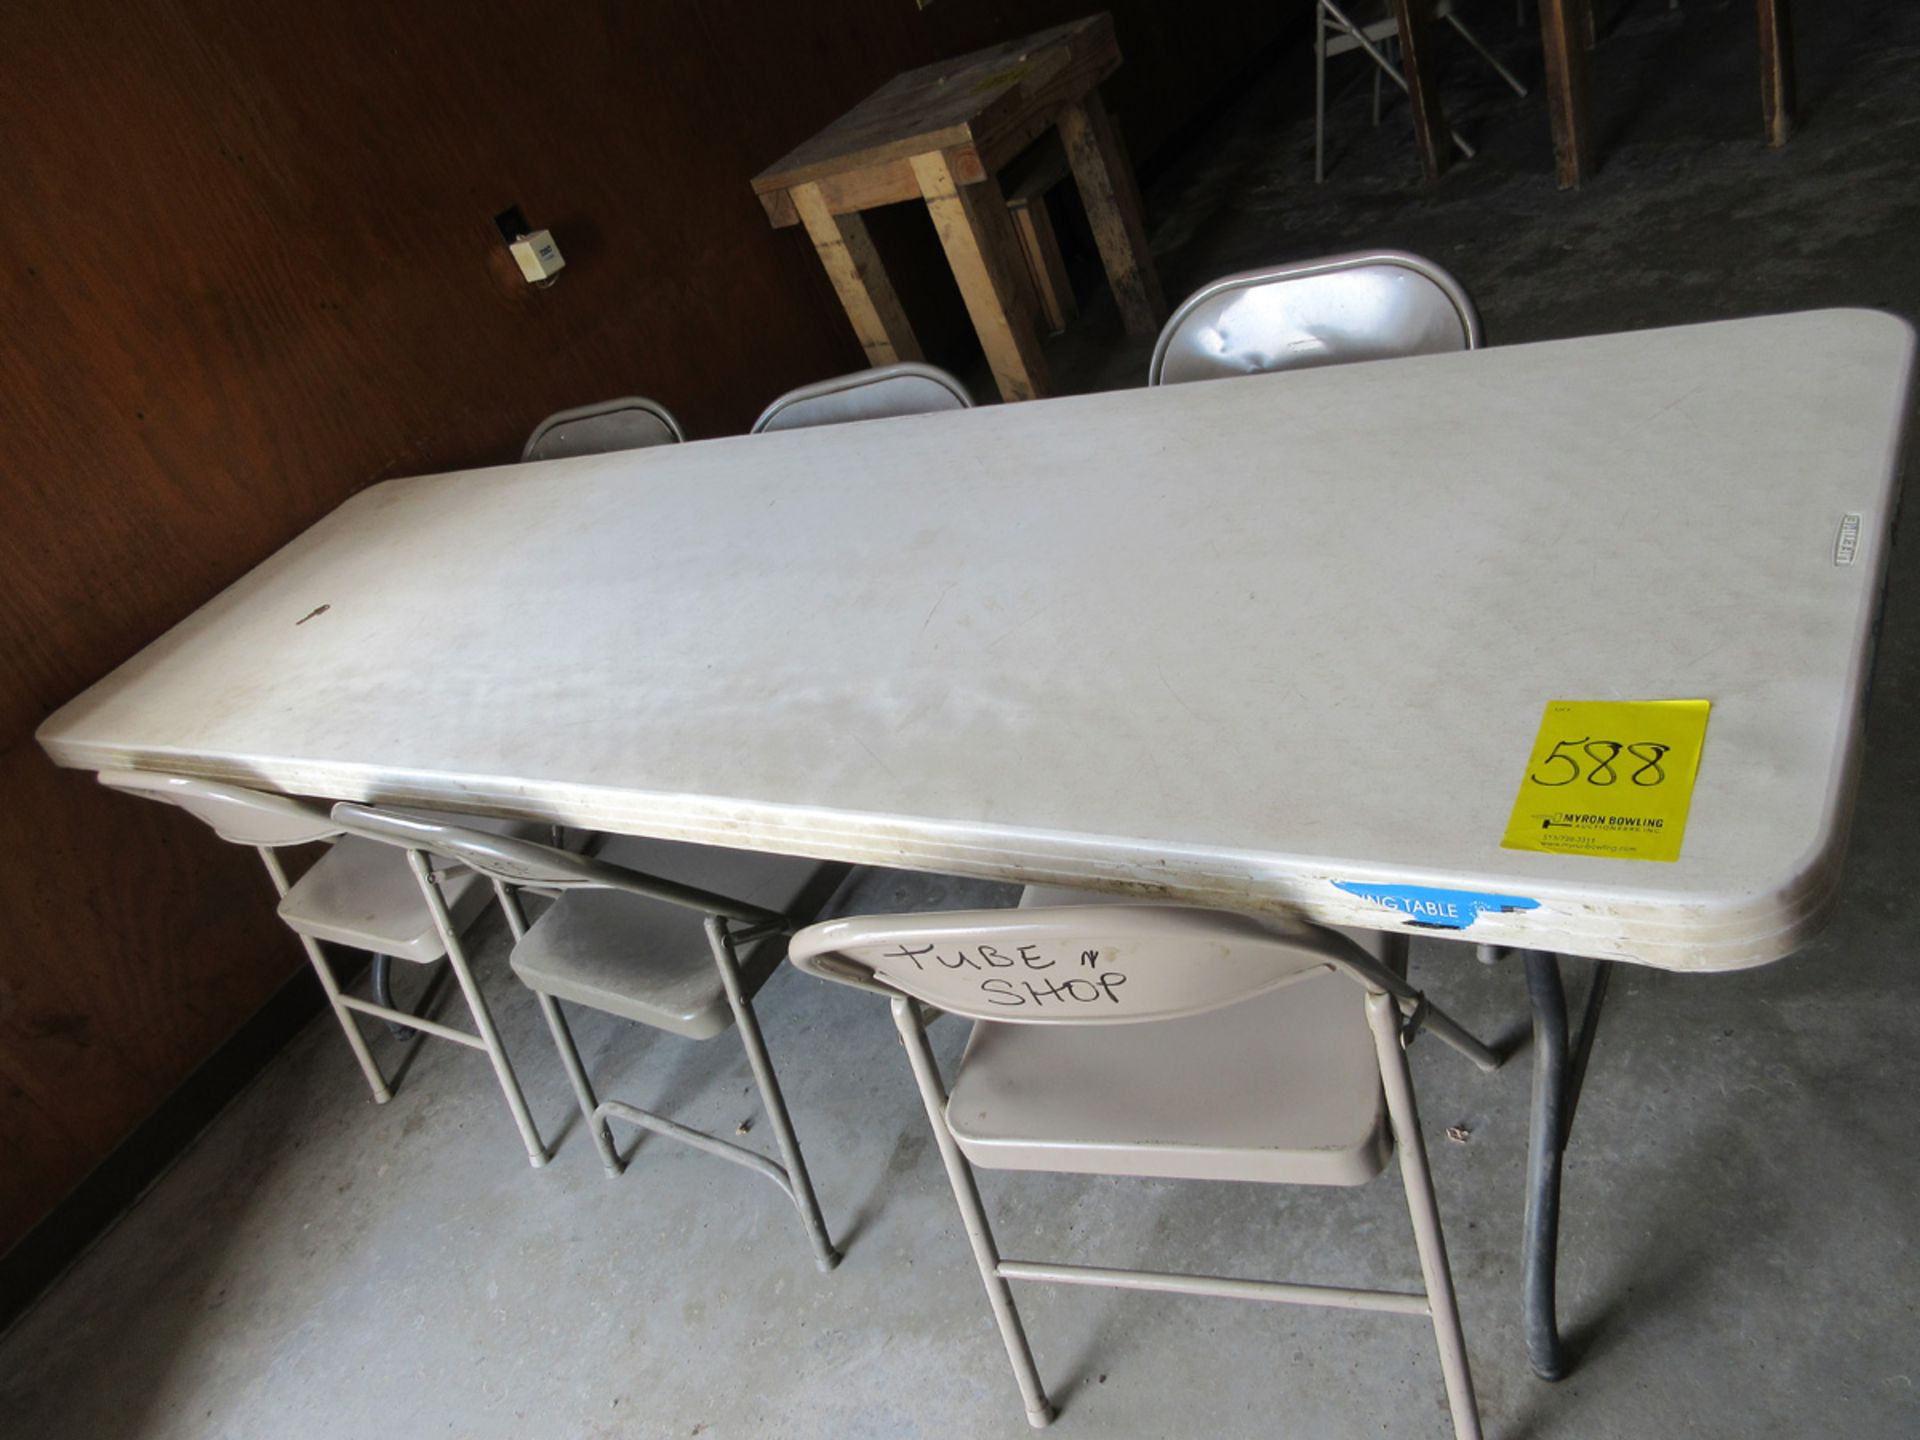 BREAKROOM TABLES & CHAIRS: (6) FOLDING TABLES, (APPROX. 25) FOLDING CHAIRS, AND OTHERS